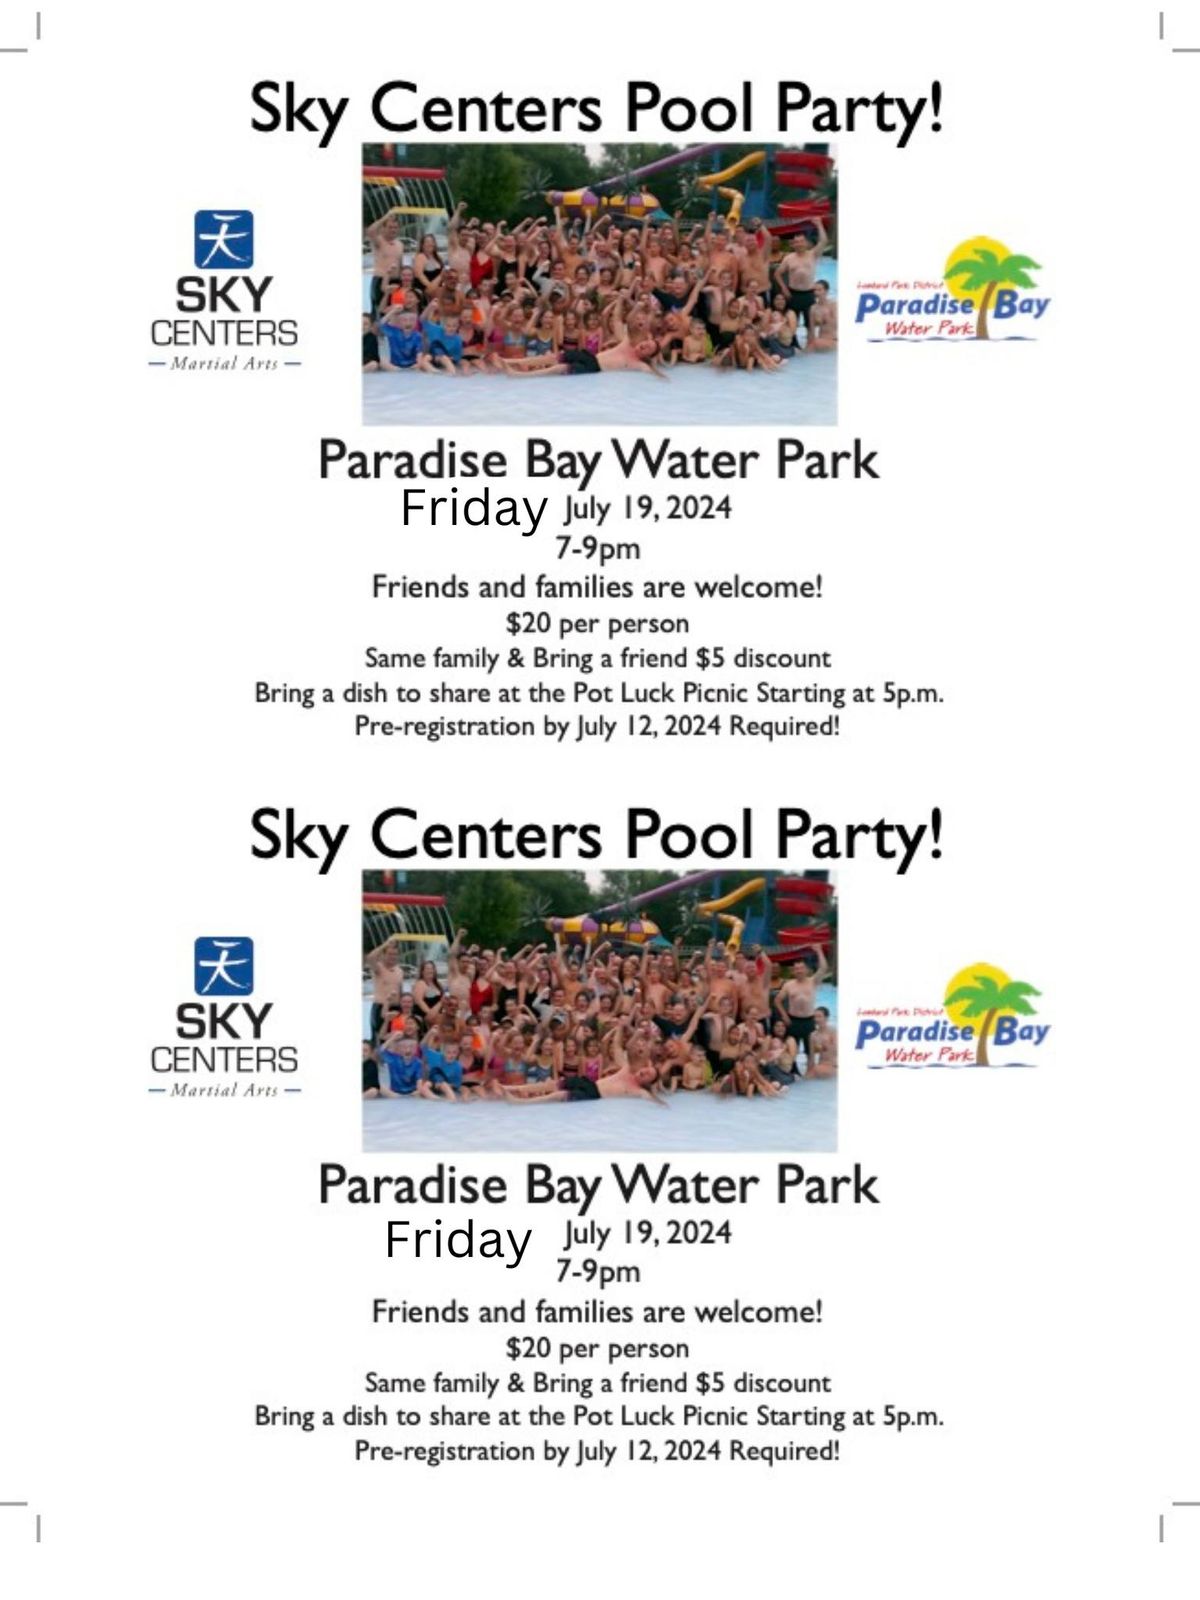 Sky Centers Annual Pool Party!